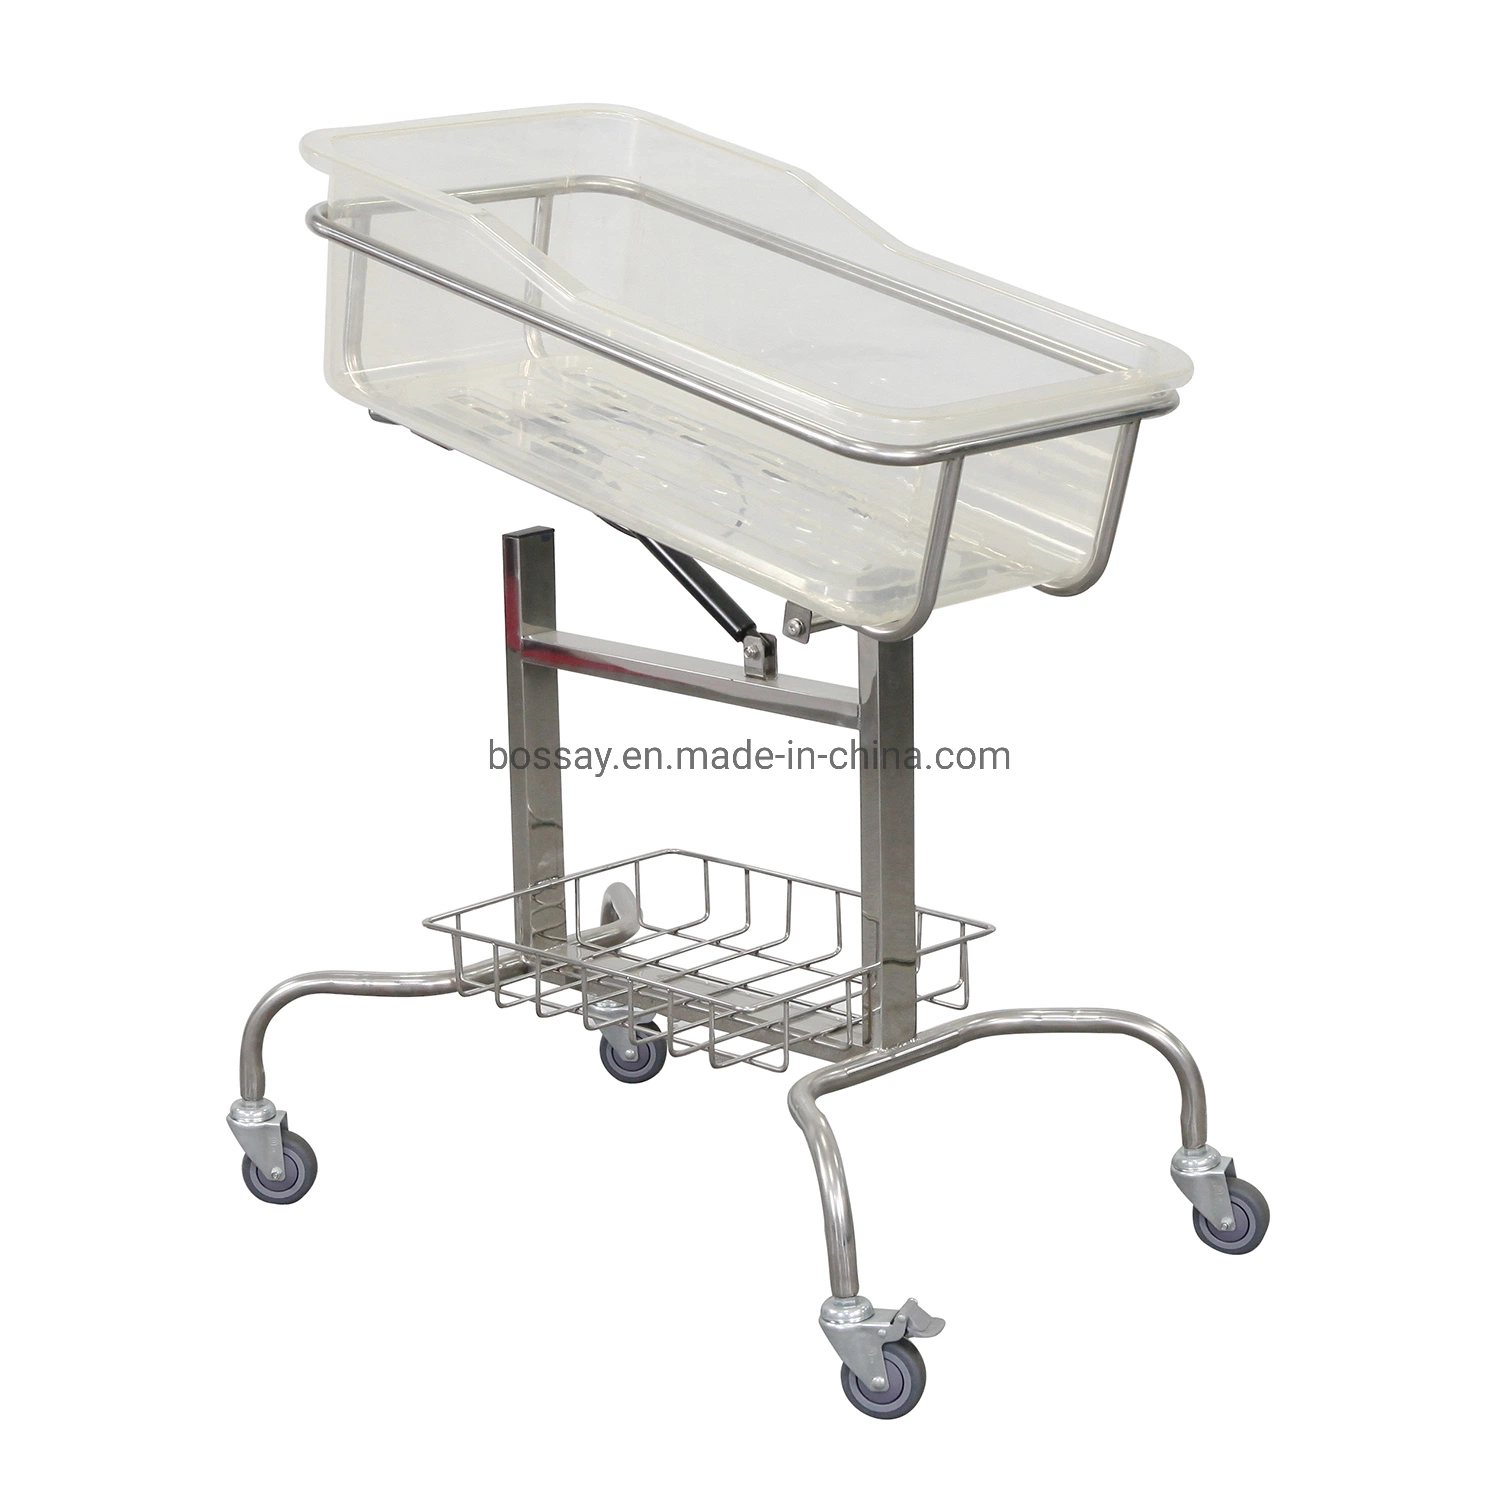 Stainless Steel Baby Nursing Trolley Infant Hospital Bed with Castors